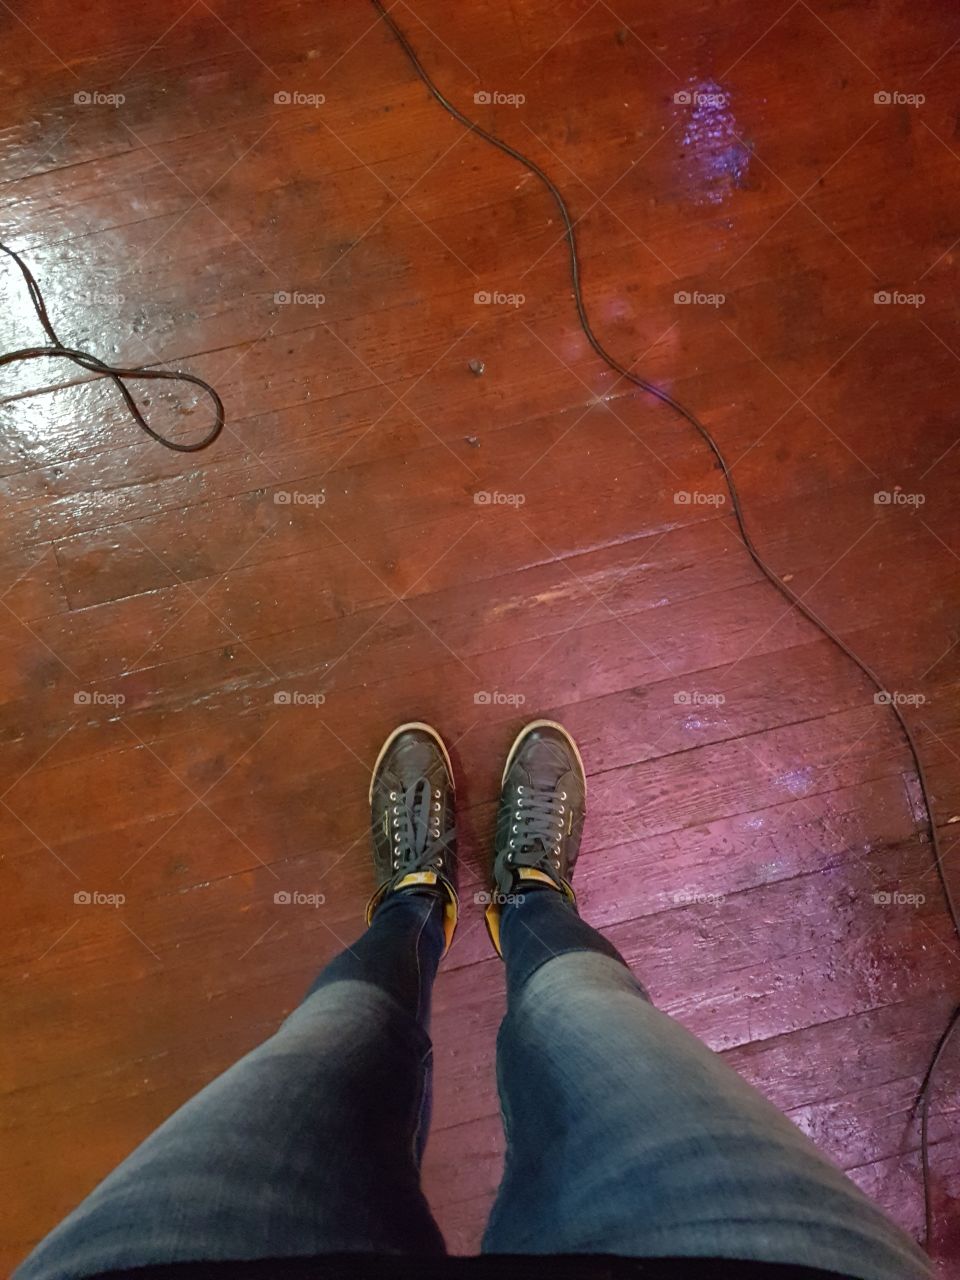 Feet on a stage